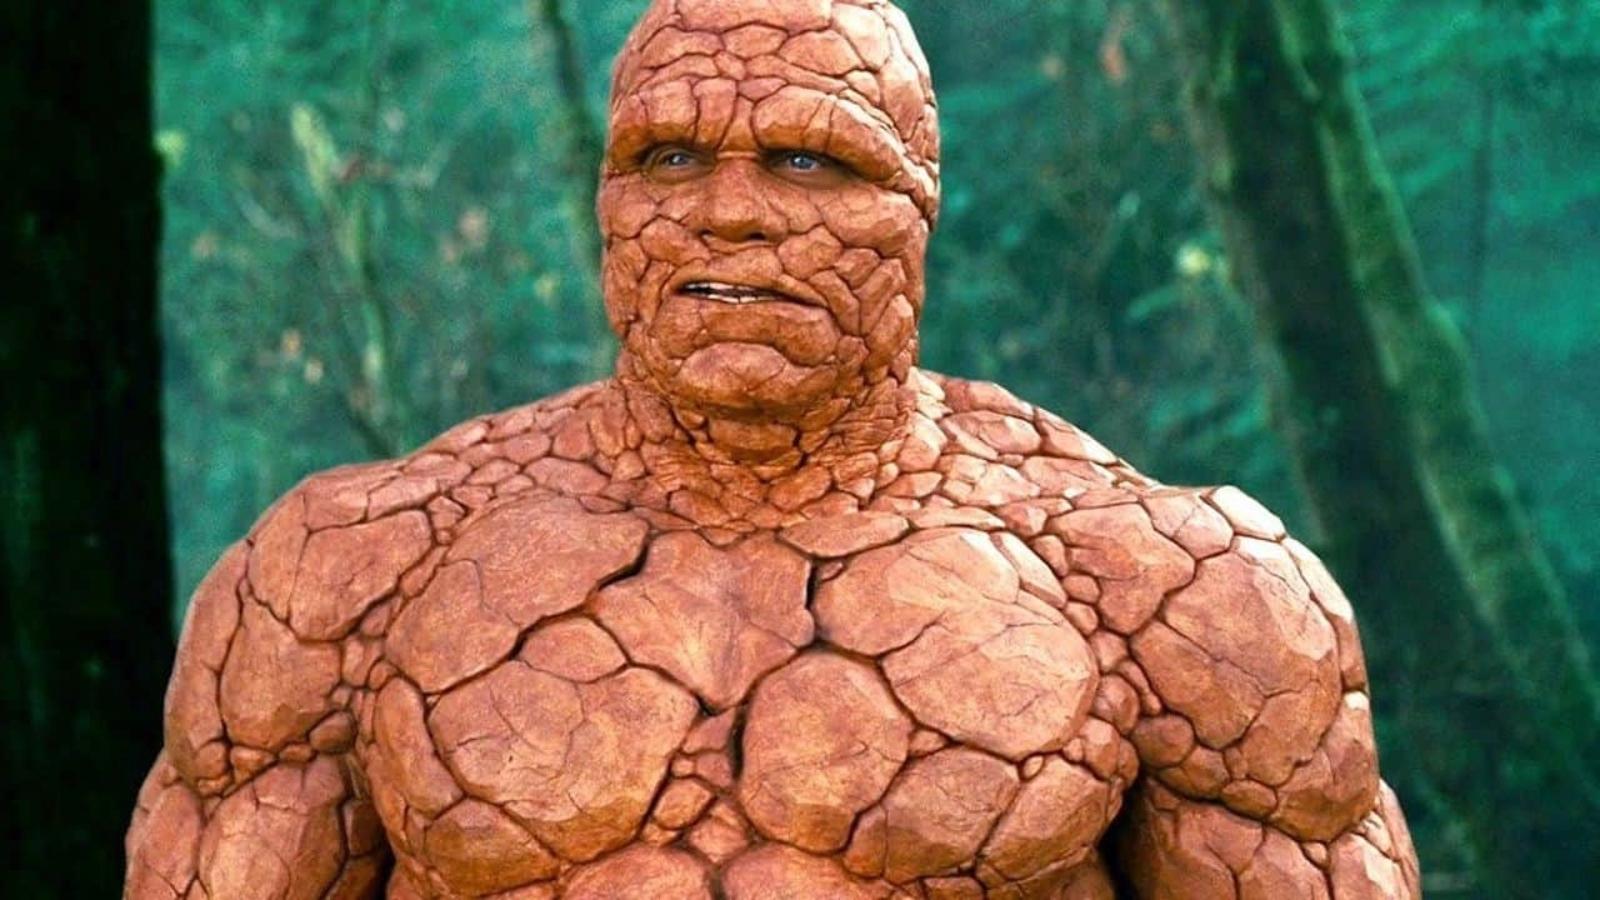 The Thing in The Fantastic Four standing in the woods with trees in the background